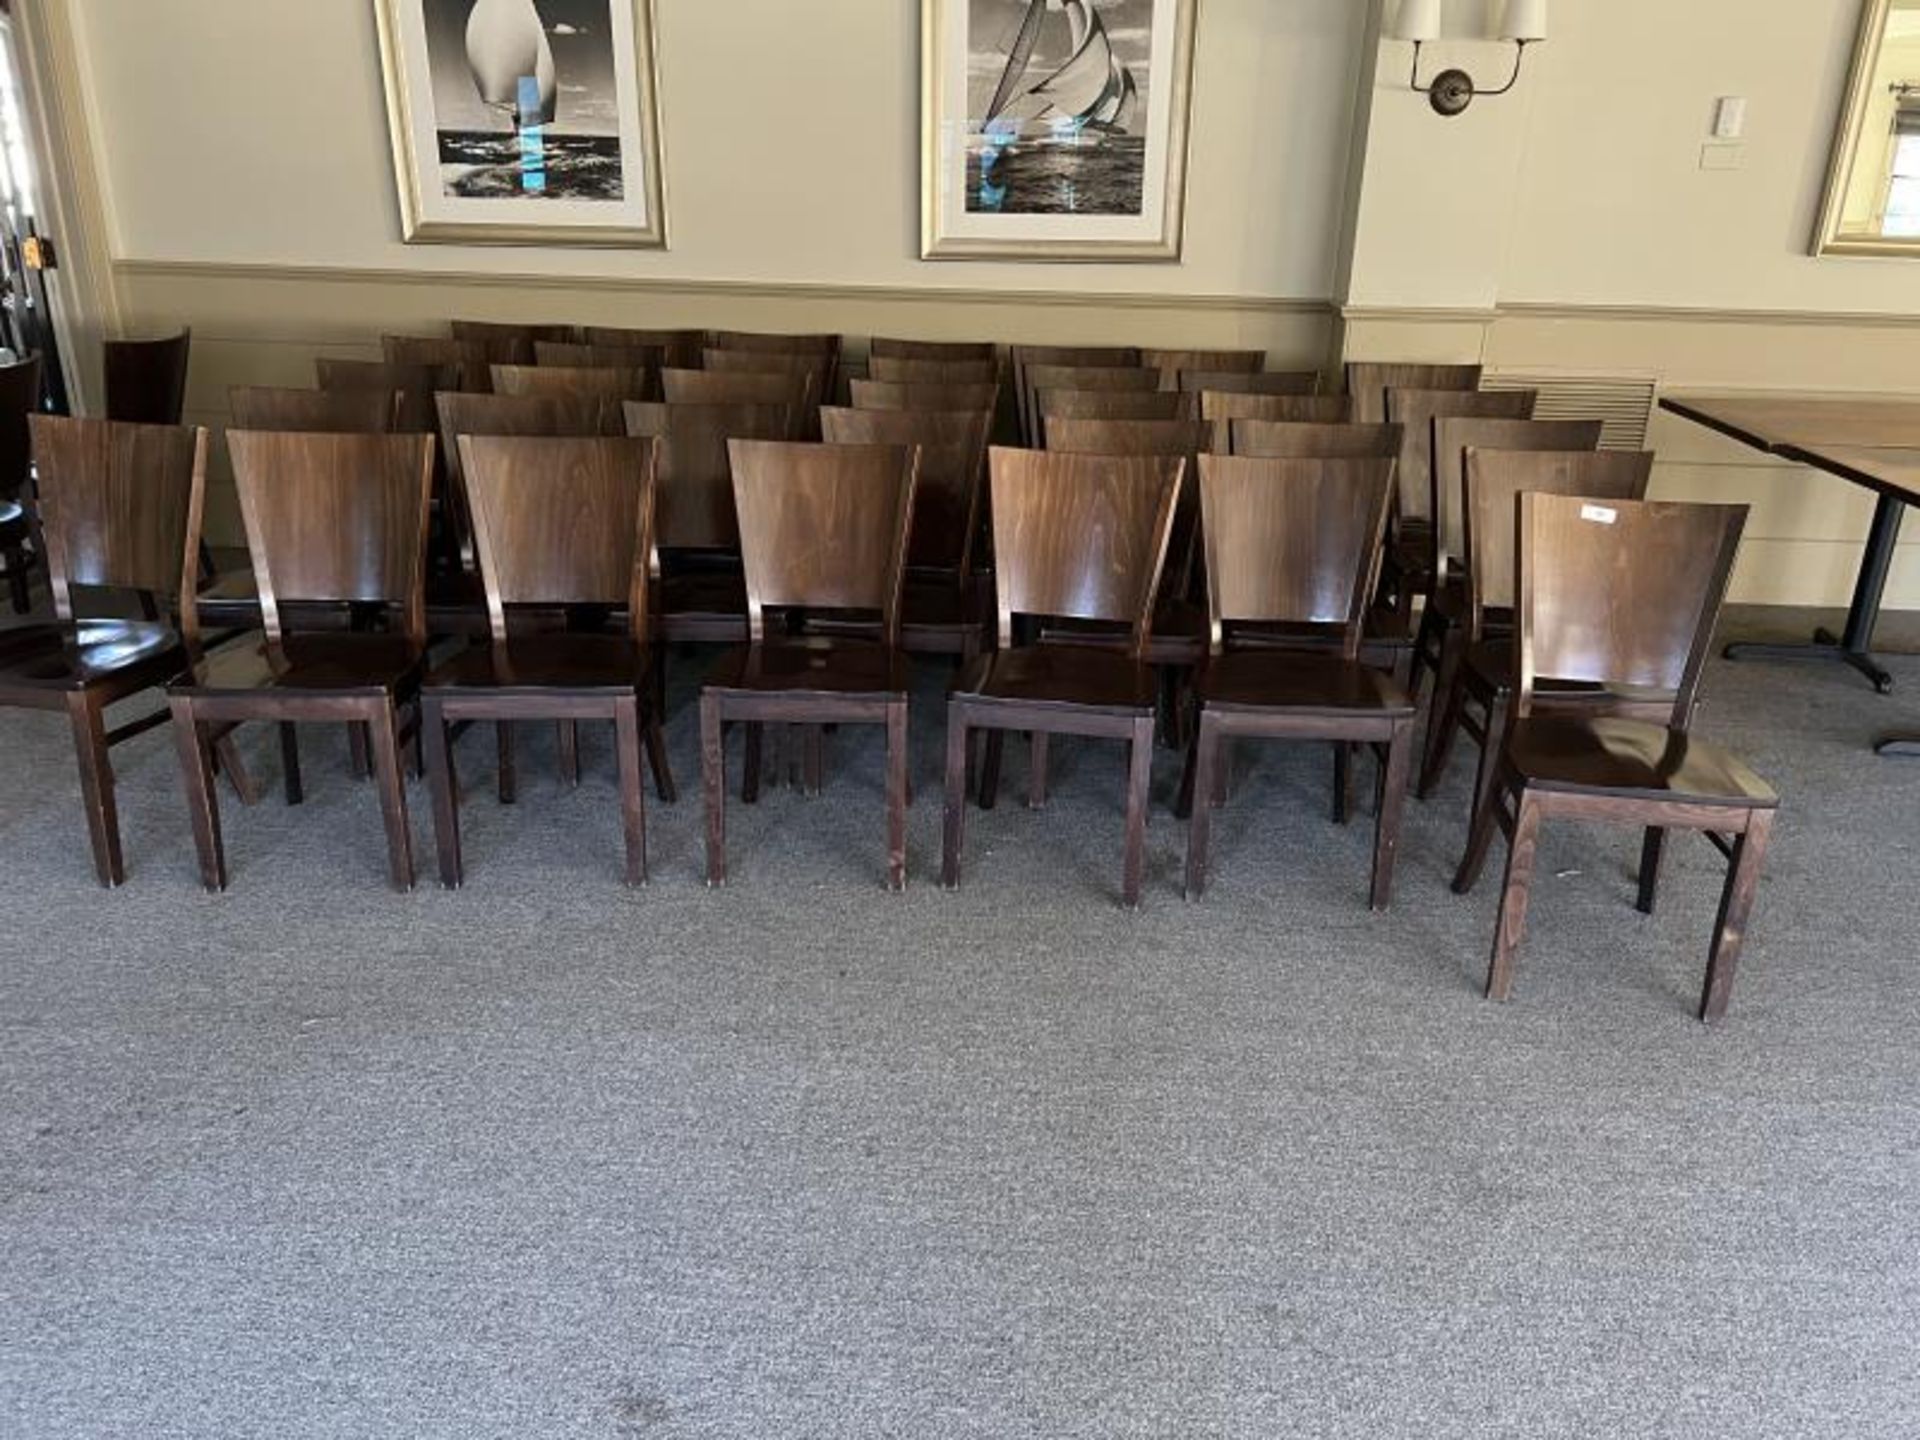 Lot of (28) Chairs, Wood Located R Front Room